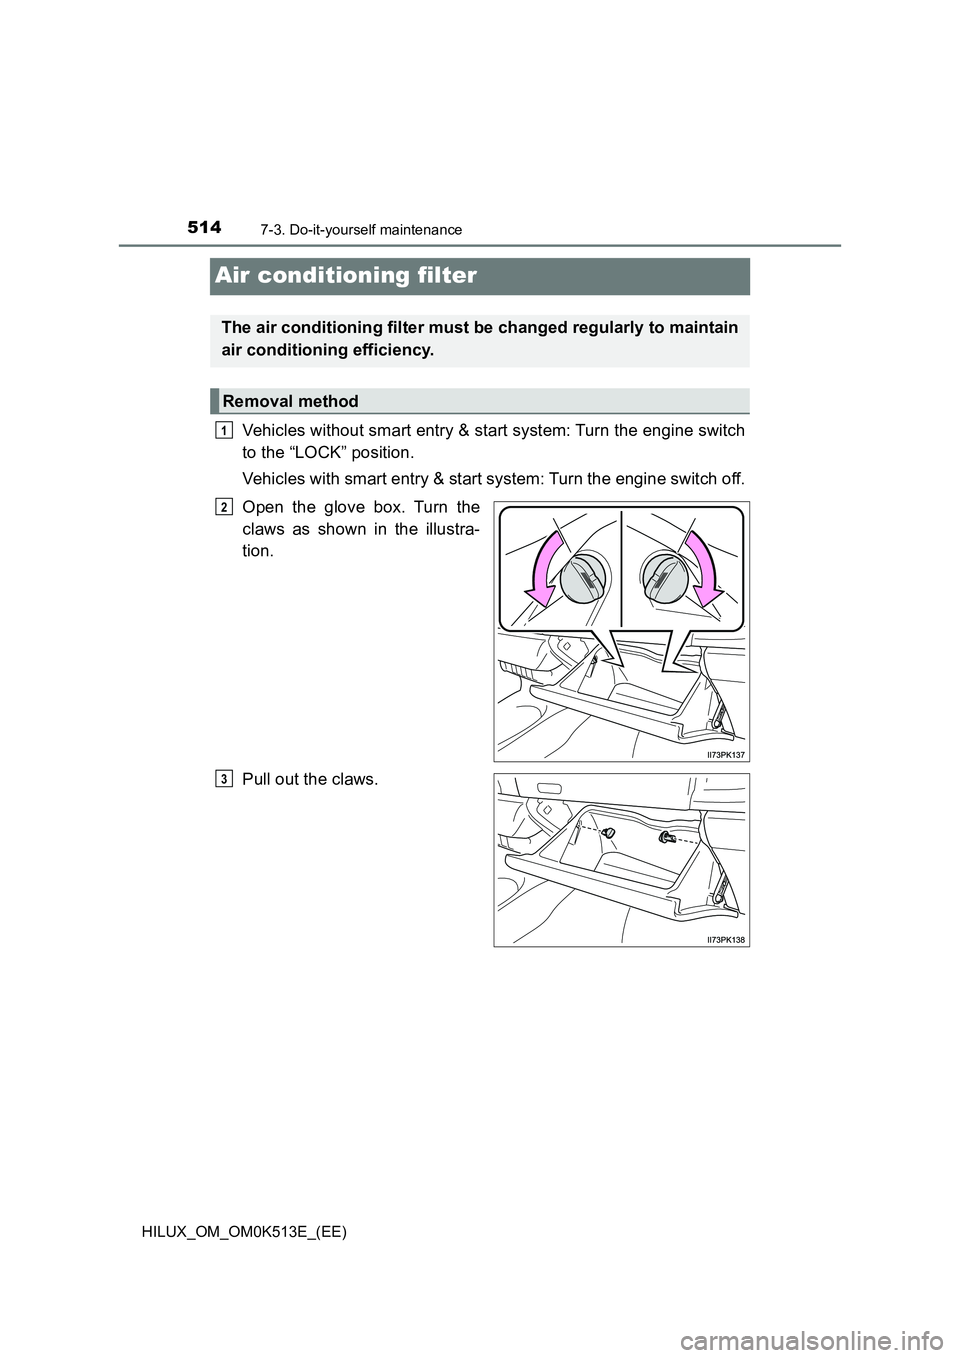 TOYOTA HILUX 2022  Owners Manual 5147-3. Do-it-yourself maintenance
HILUX_OM_OM0K513E_(EE)
Air conditioning filter
Vehicles without smart entry & start system: Turn the engine switch 
to the “LOCK” position. 
Vehicles with smart 